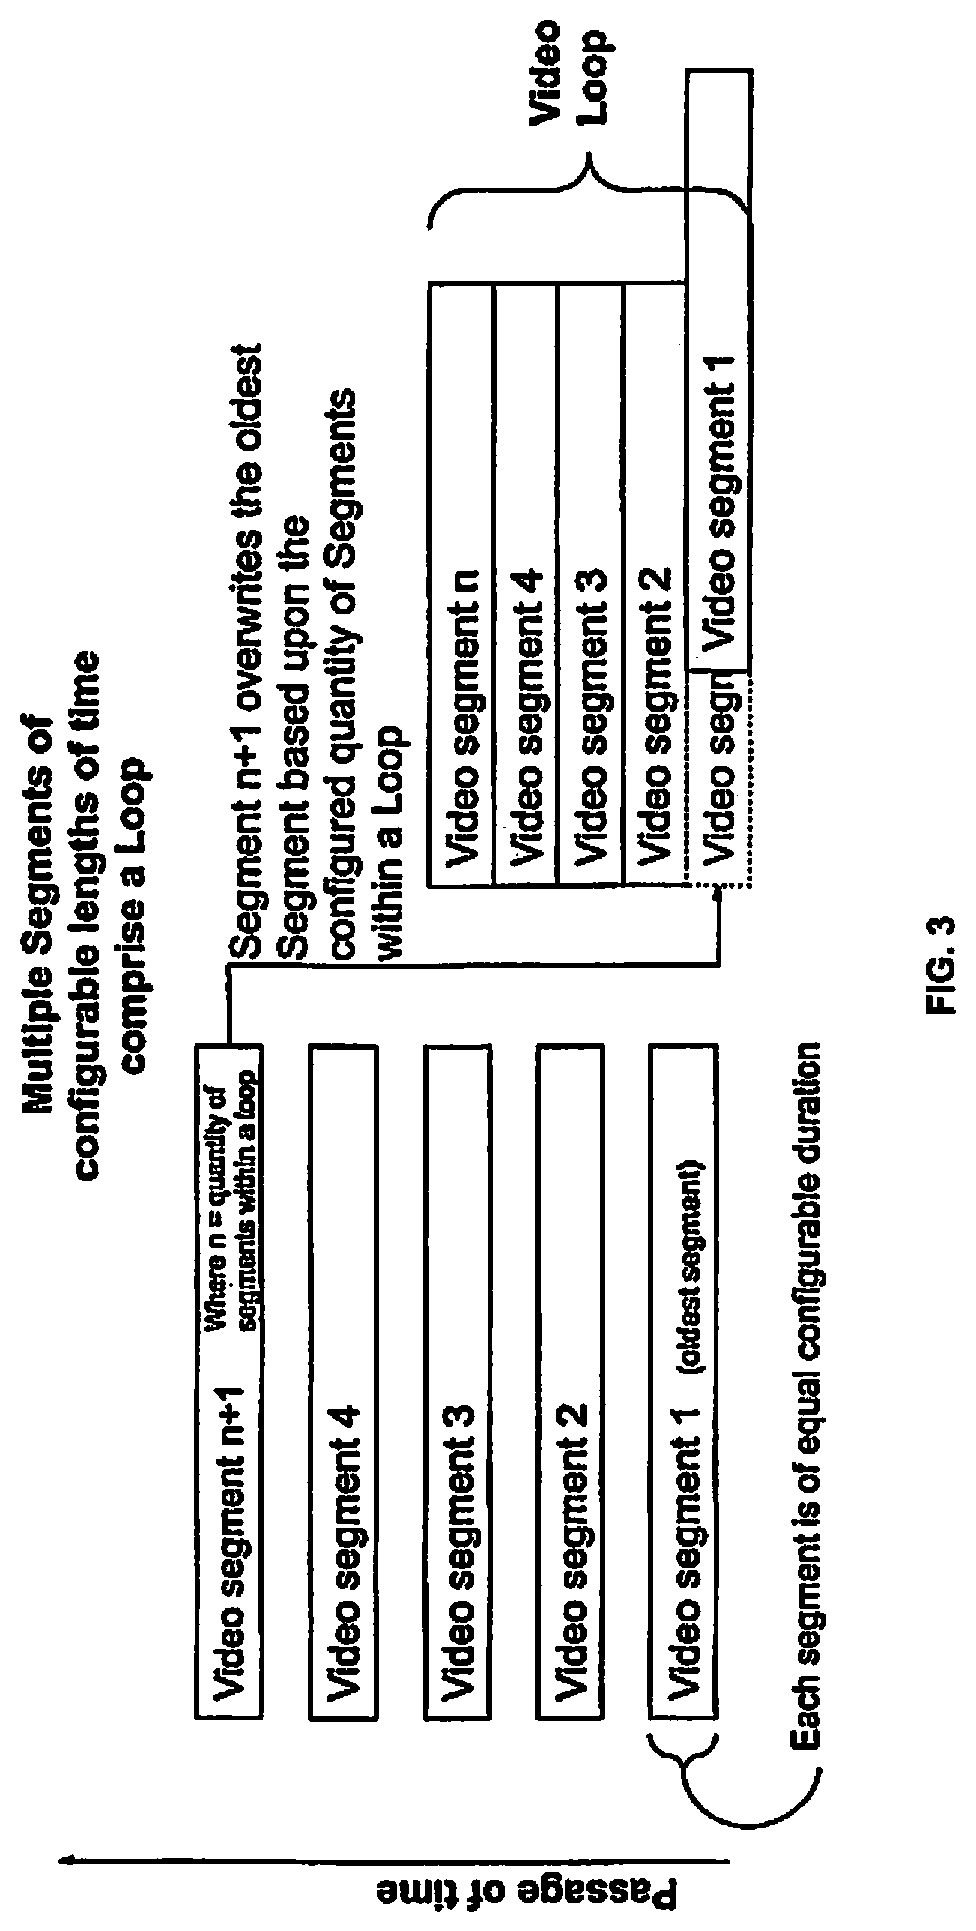 Systems and Methods for Capturing and Distributing Specified Moments of Activity